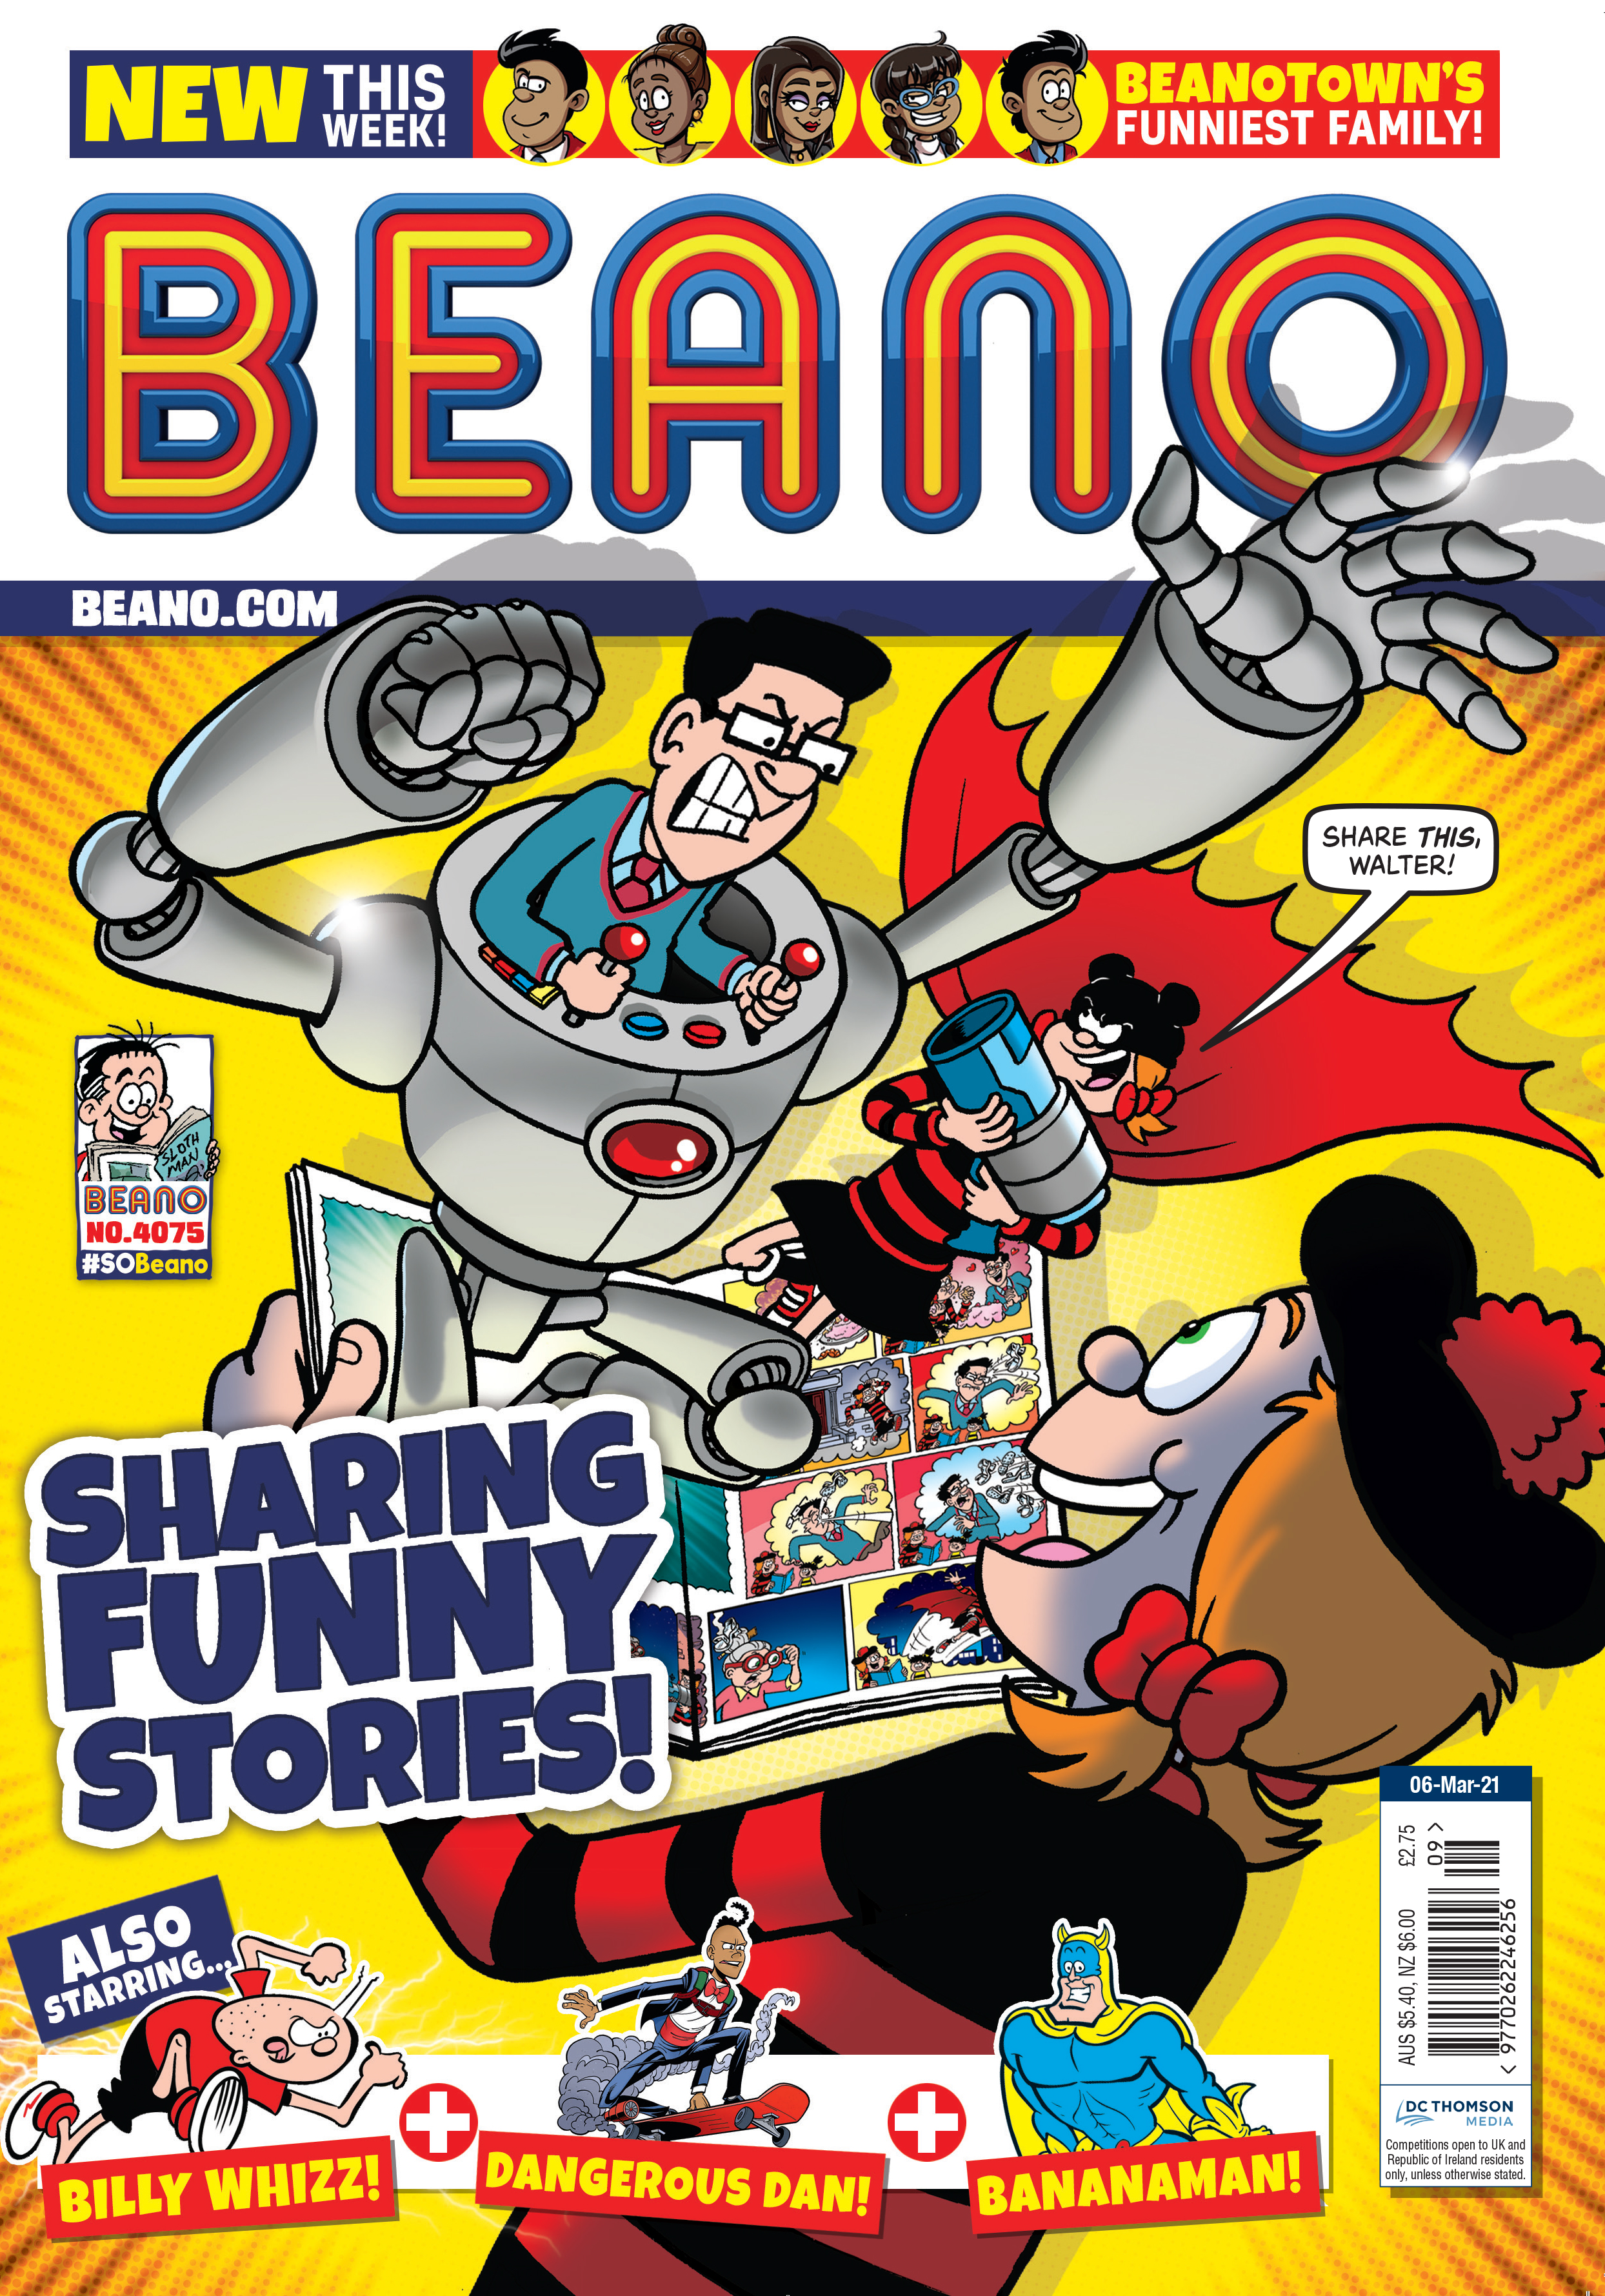 The cover of Beano no. 4075